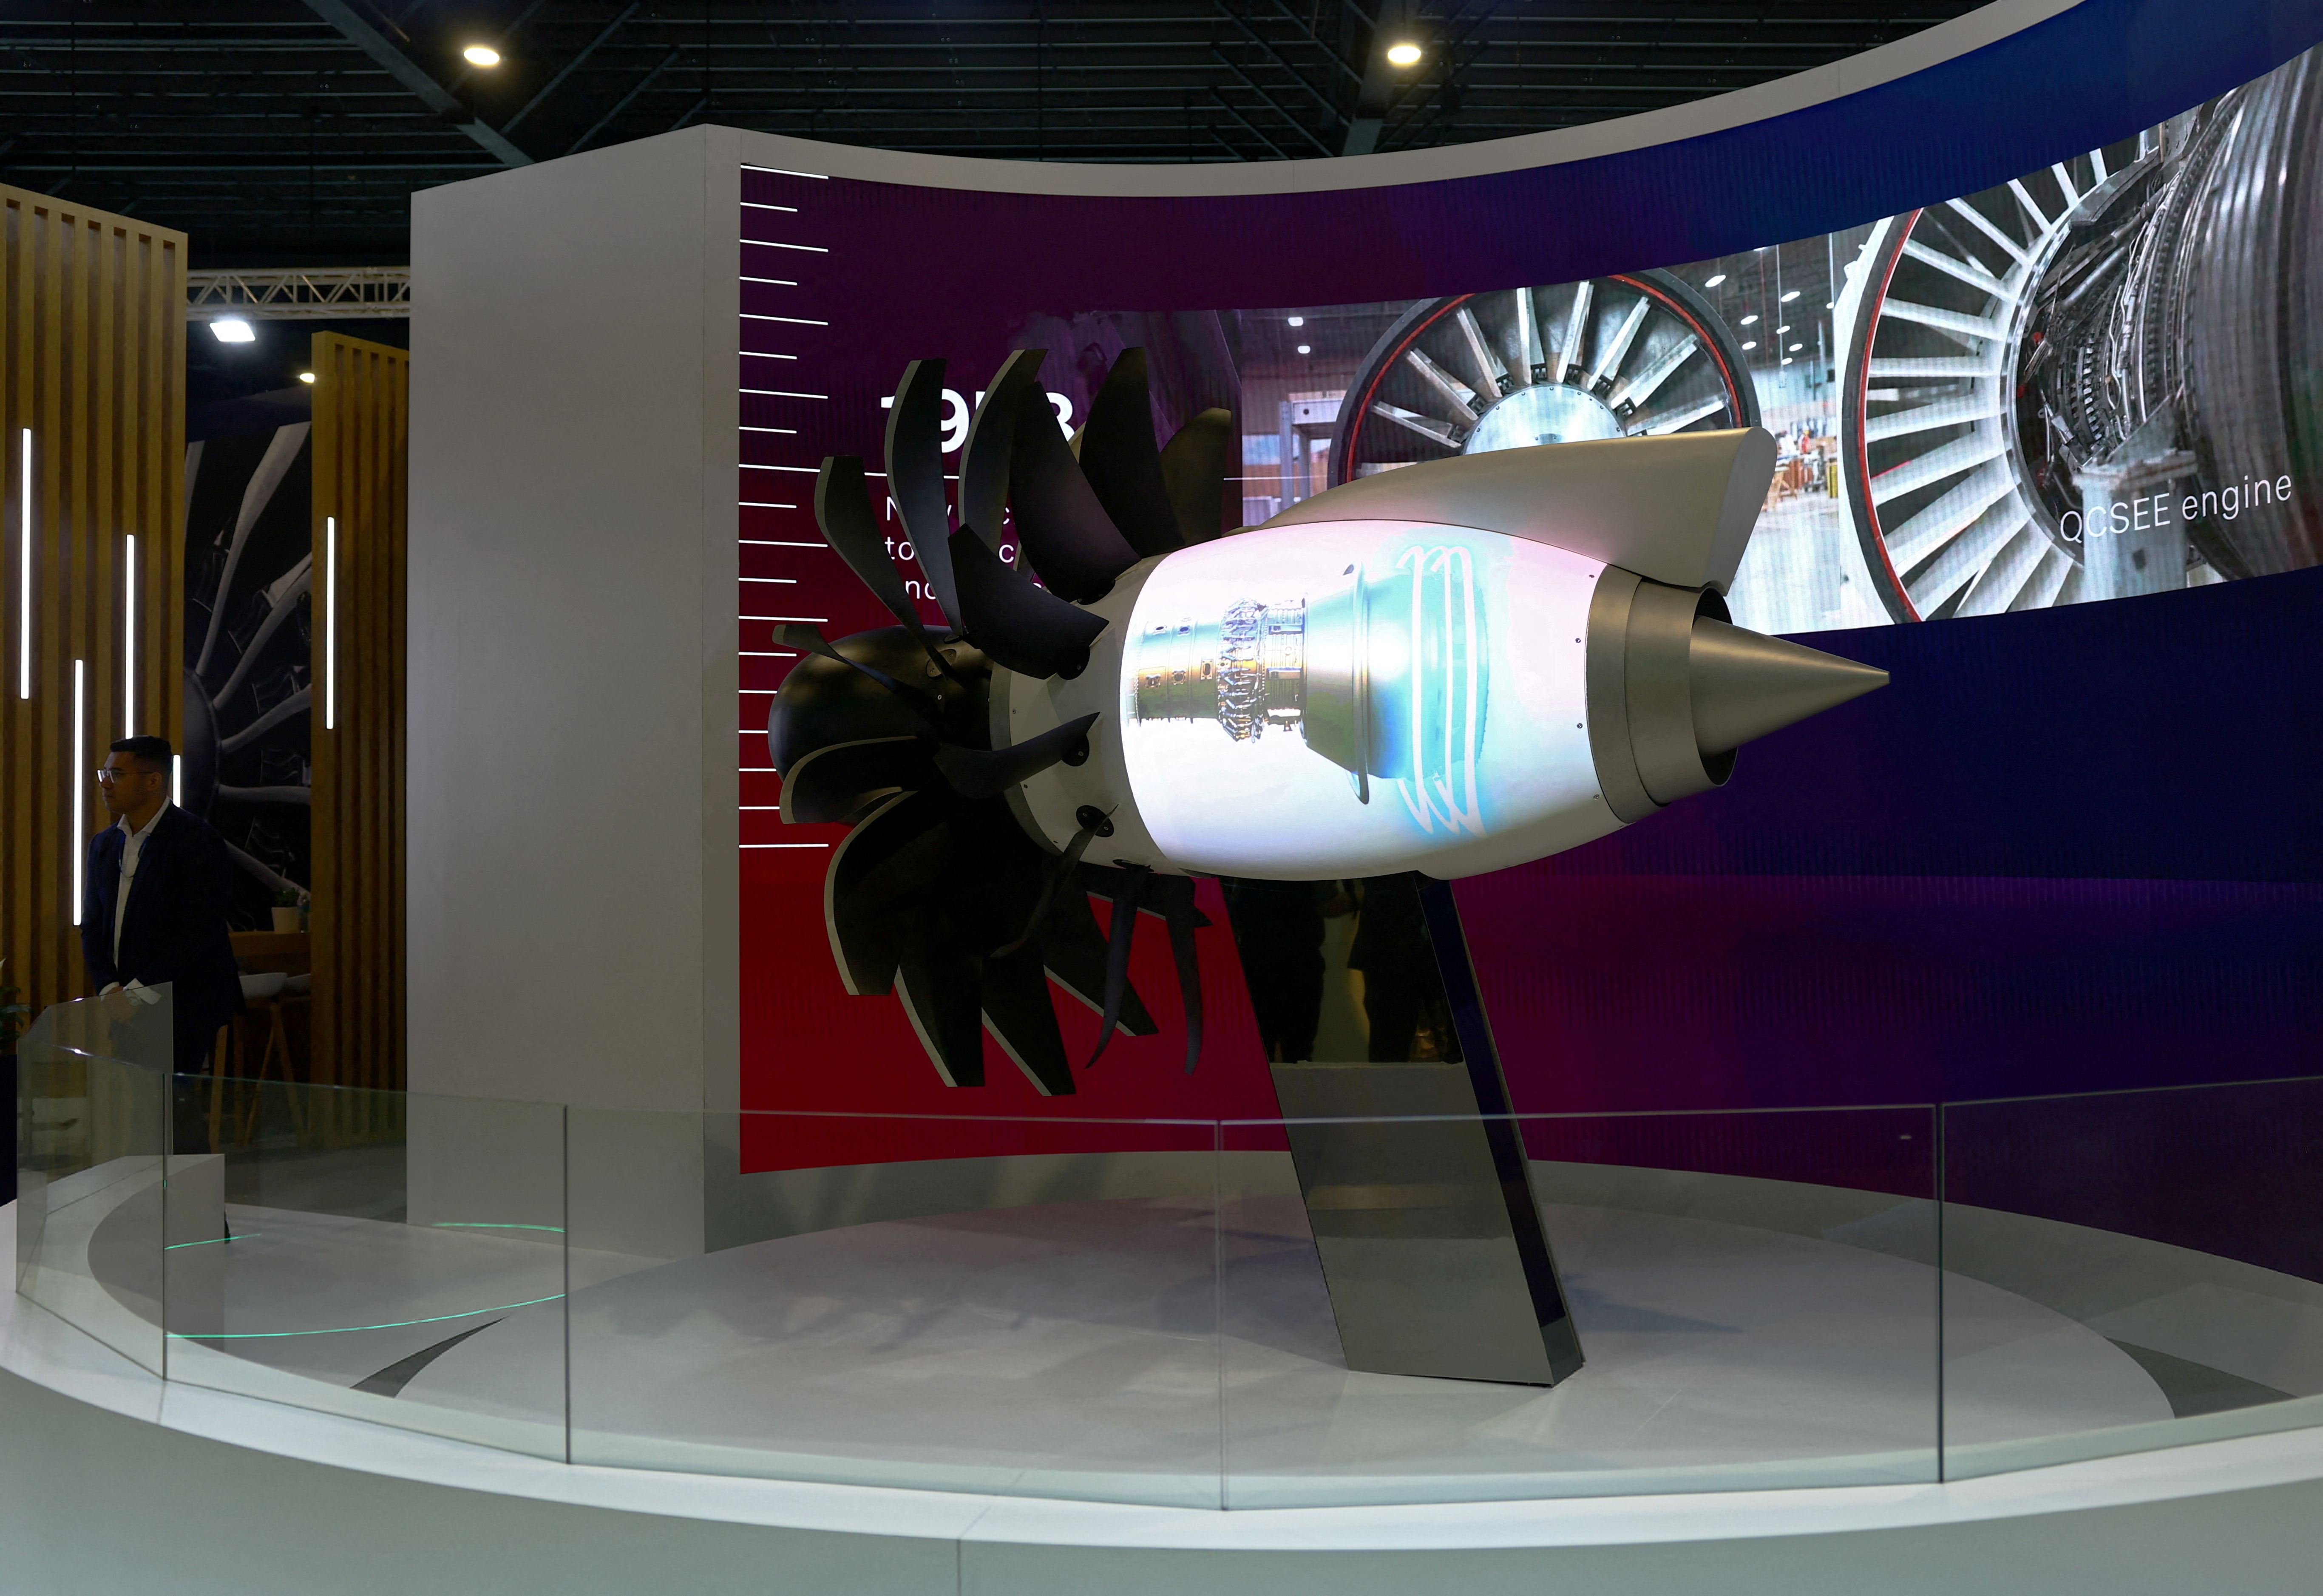 A view of the GE Aerospace booth at Changi Exhibition Centre in Singapore